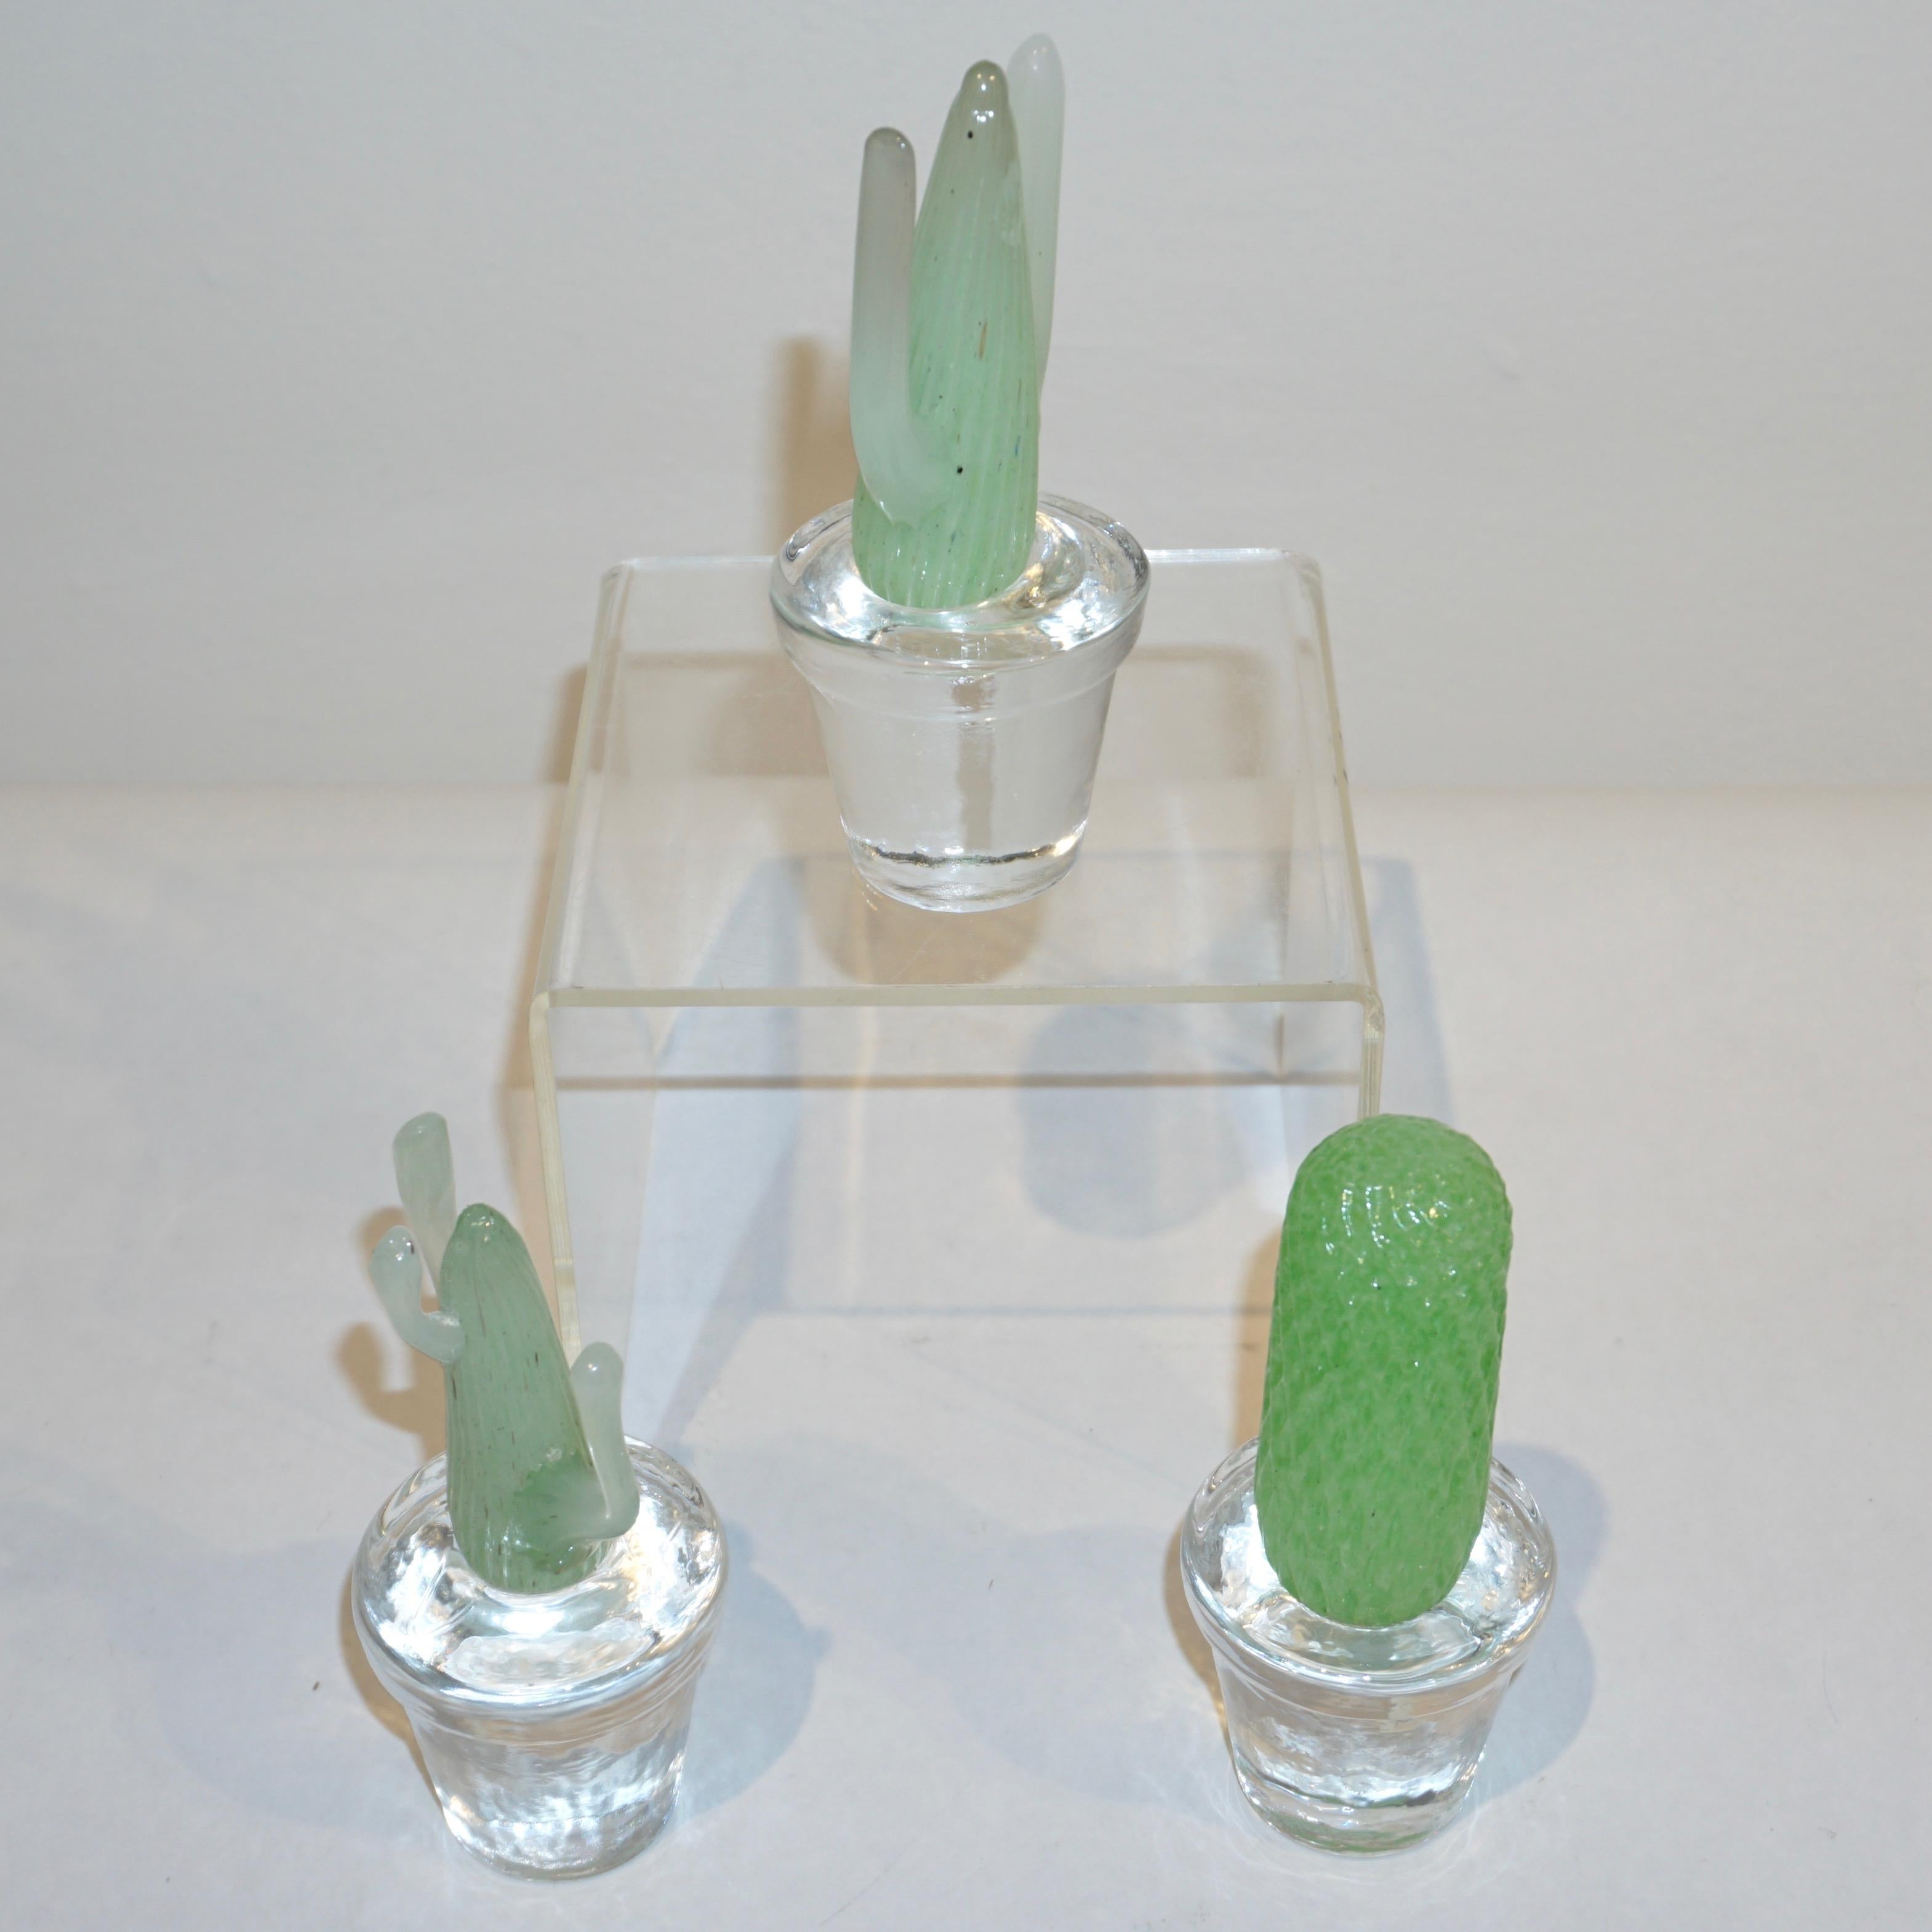 Art Glass 1990s Marta Marzotto Miniature Green Murano Glass Cactus Plants by Formia For Sale